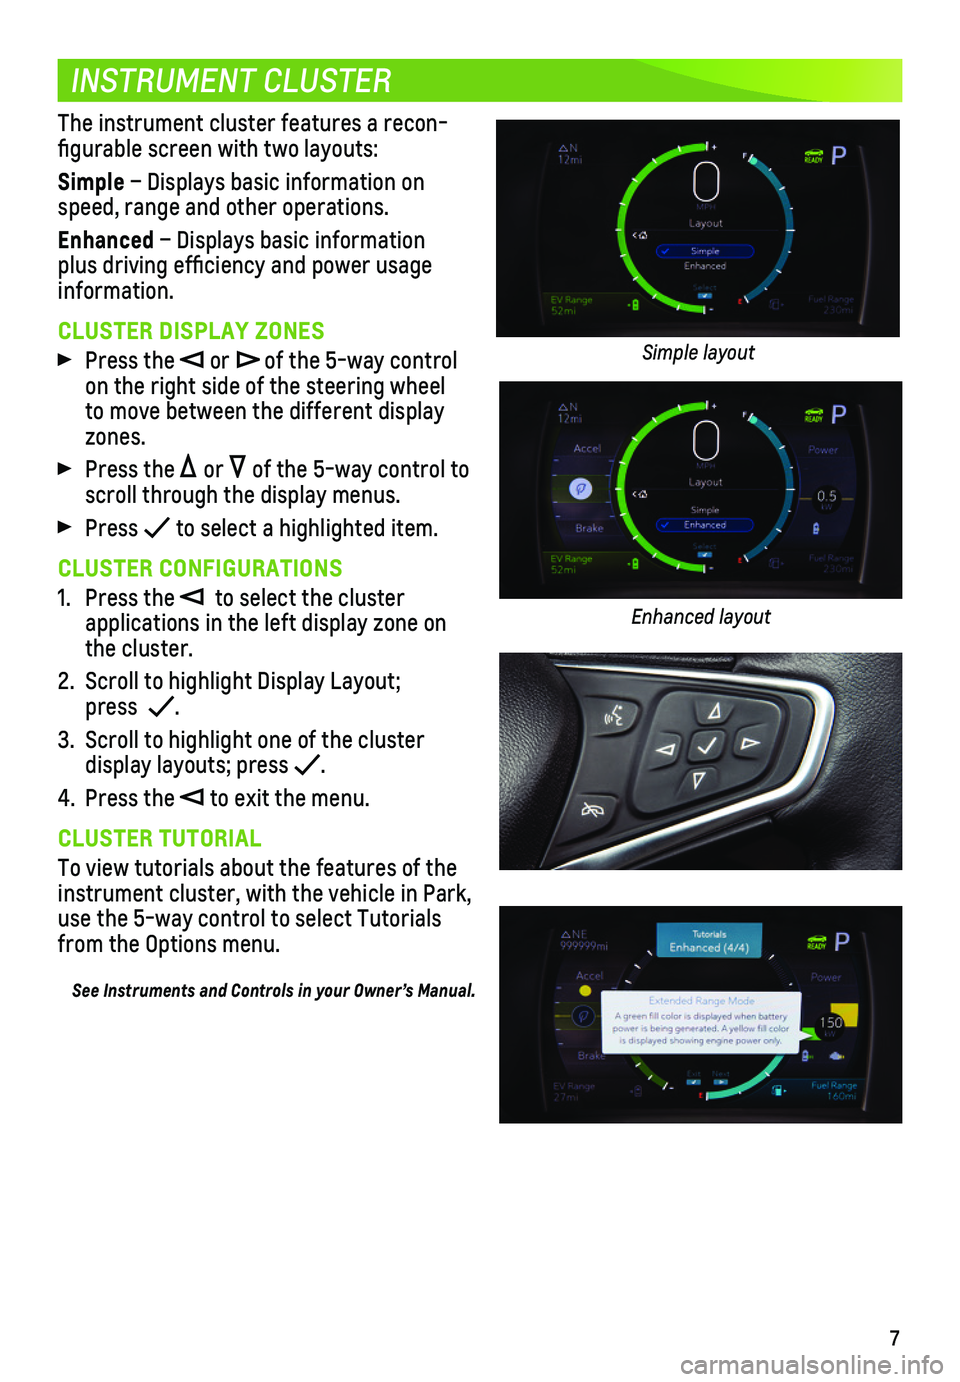 CHEVROLET VOLT 2019  Get To Know Guide 7
INSTRUMENT CLUSTER
The instrument cluster features a recon-figurable screen with two layouts:
Simple – Displays basic information on speed, range and other operations. 
Enhanced – Displays basic